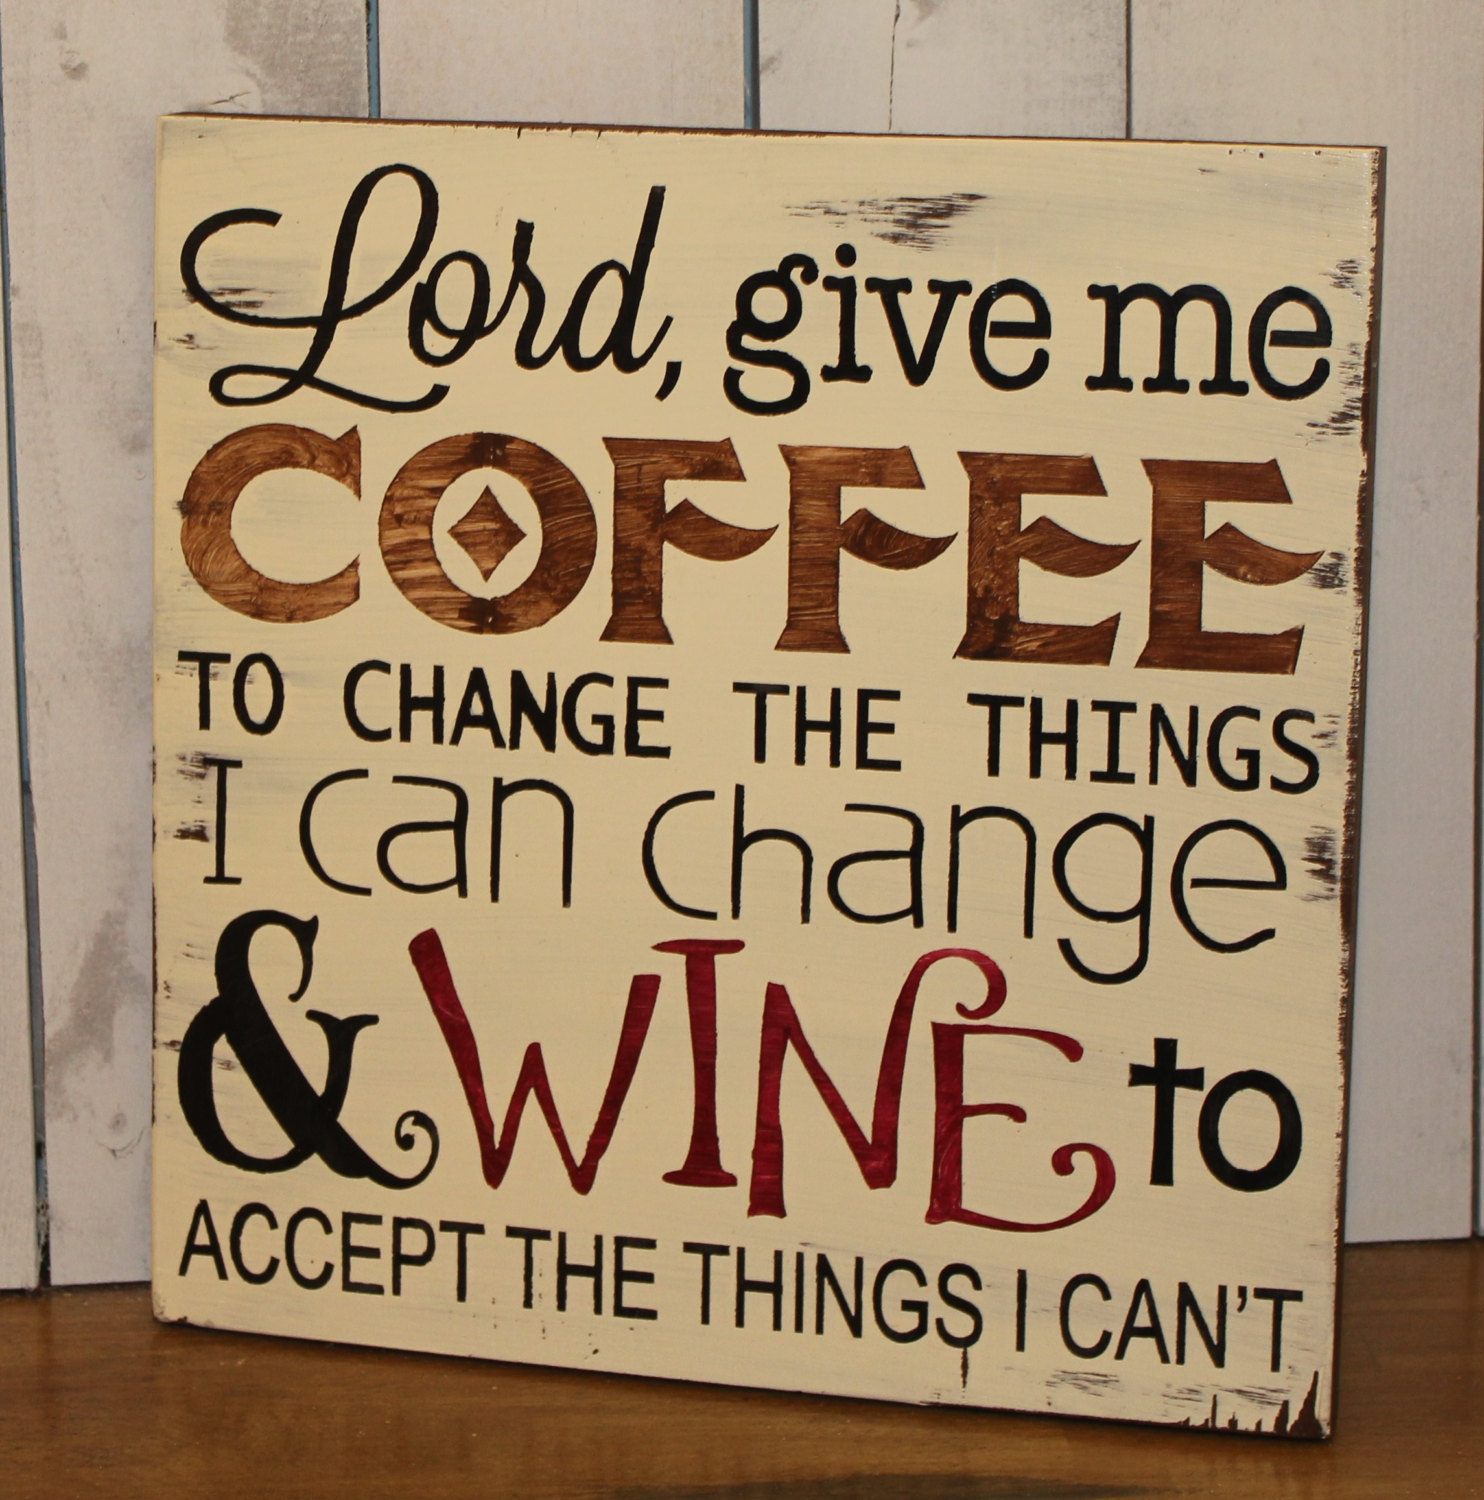 Can i have any coffee. Give me Coffee to change the things i can and Wine to accept those that i cannot. Give me Coffee to change. Give me Coffee to change the things i can and Wine to accept those that i cannot перевод.